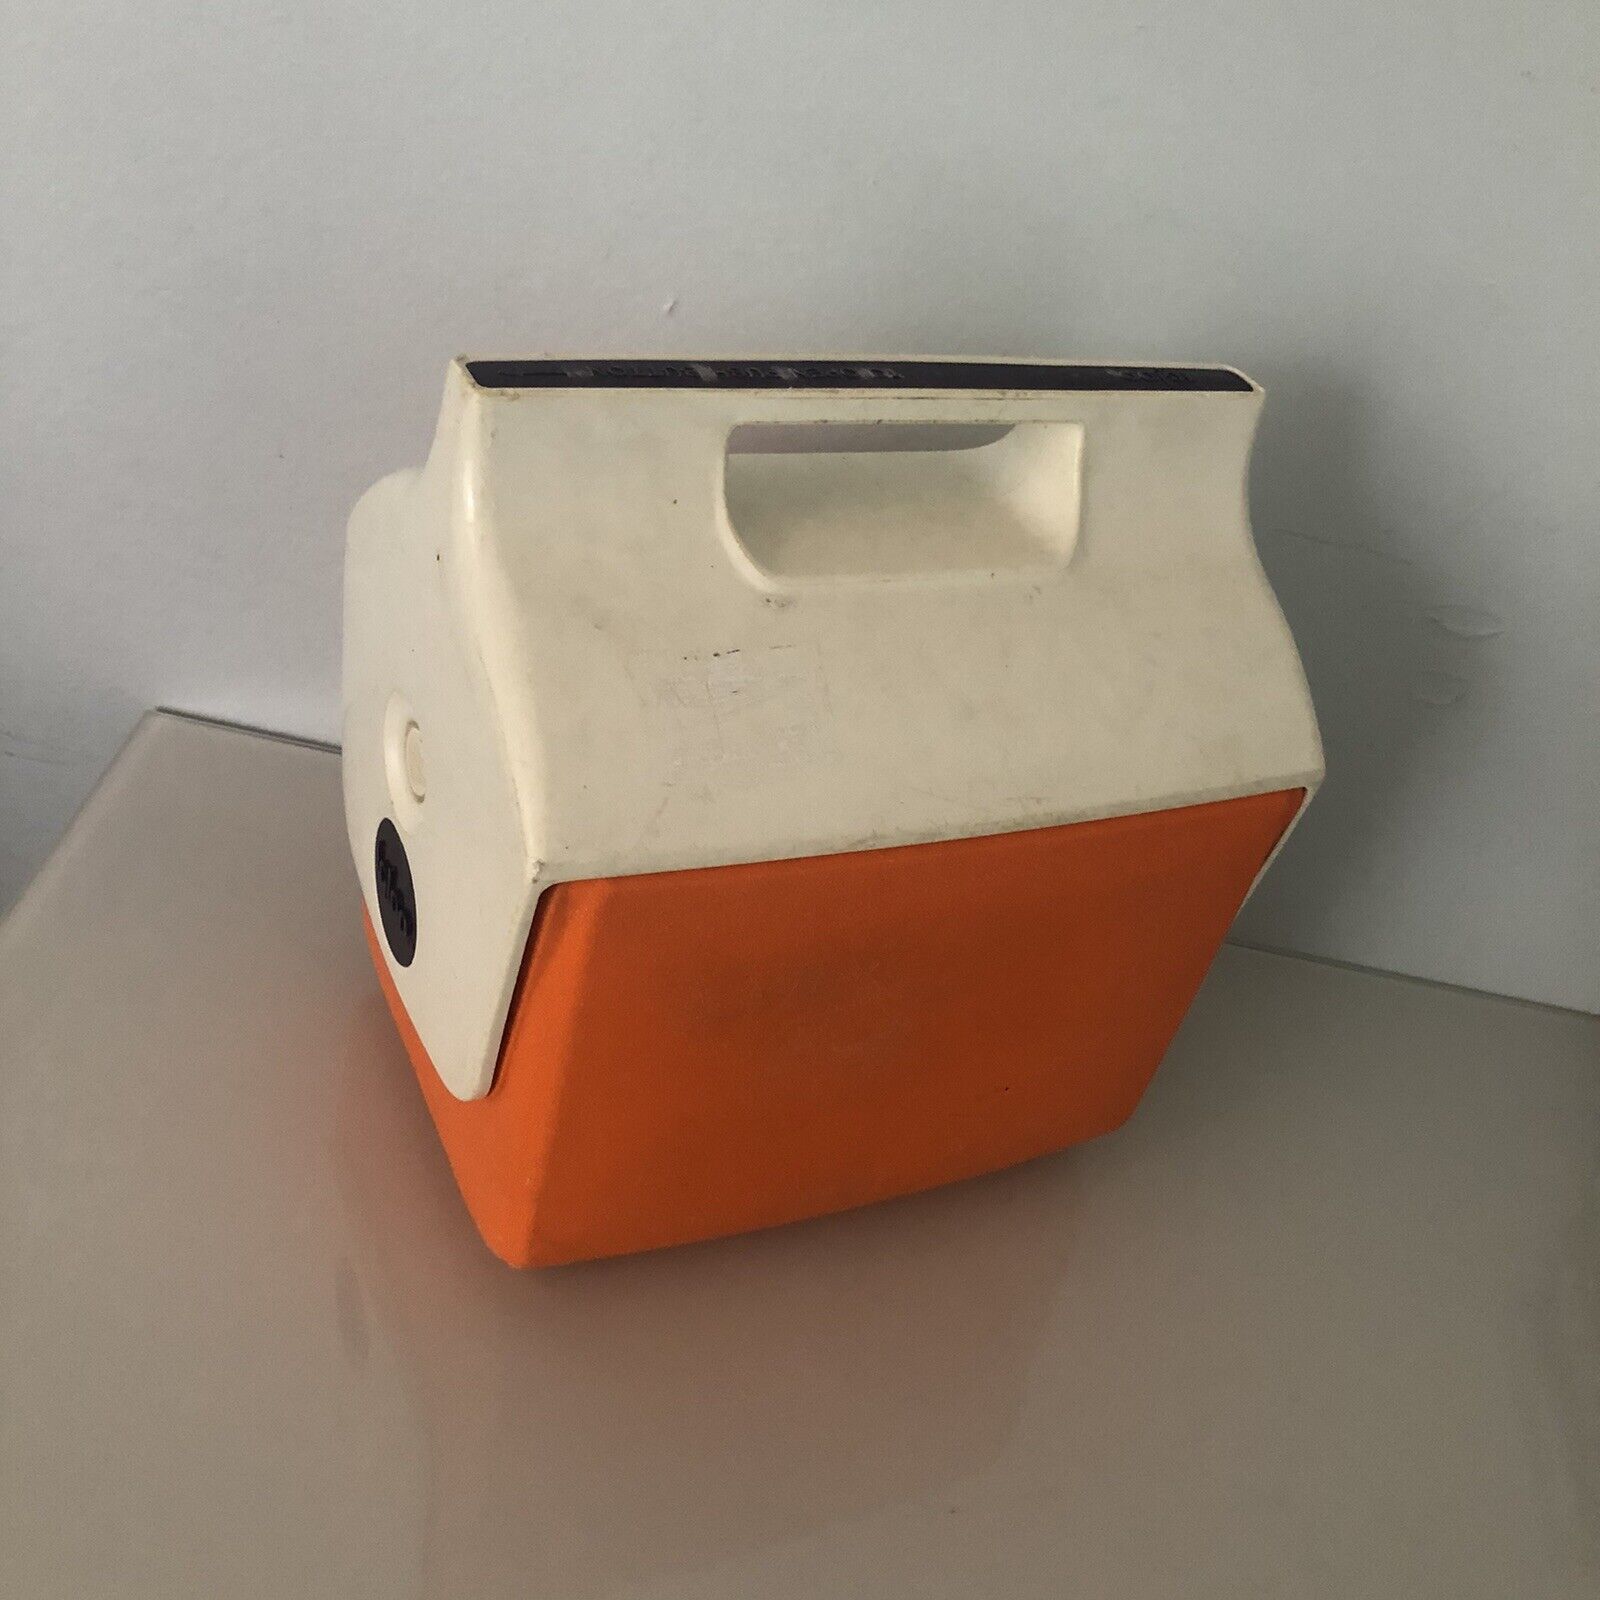 VINTAGE 1989-1990 IGLOO COOLER LUNCHMATE LUNCHBOX - PUSH BUTTON OPEN ORANGE